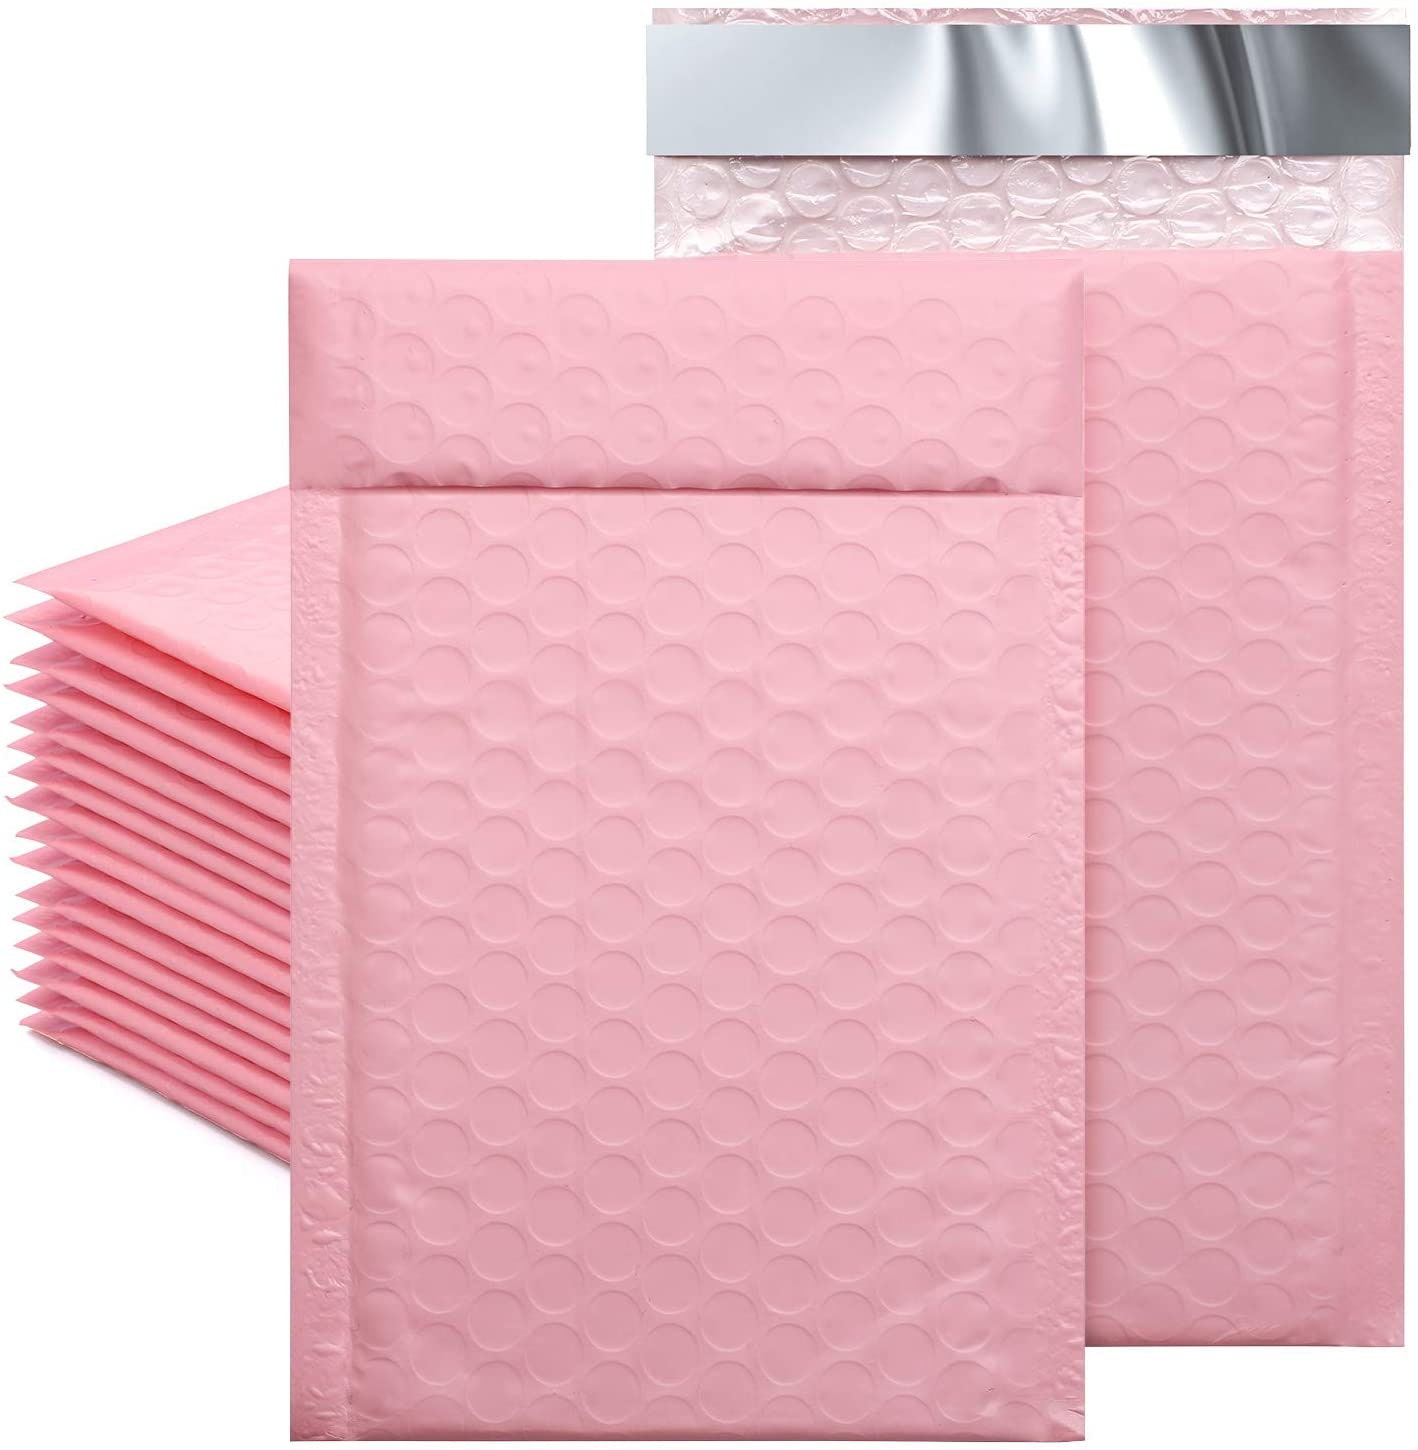 Pink, 4x8 Fu Global Upgrade Opaque Pink #000 Poly Bubble Mailer Self Seal Padded Envelopes Pack of 50 